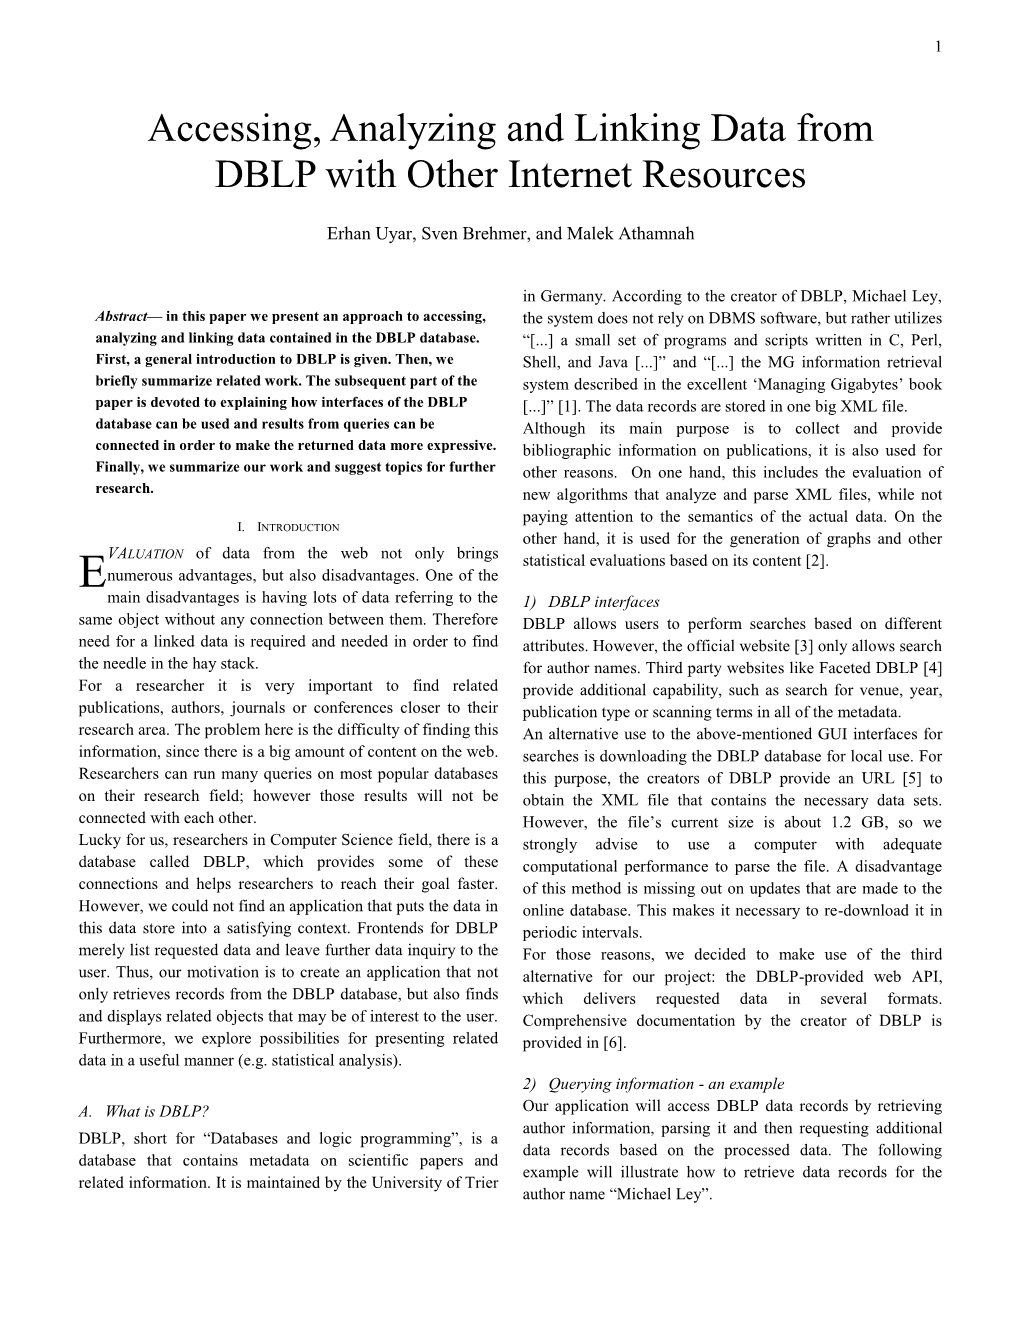 Accessing, Analyzing and Linking Data from DBLP with Other Internet Resources